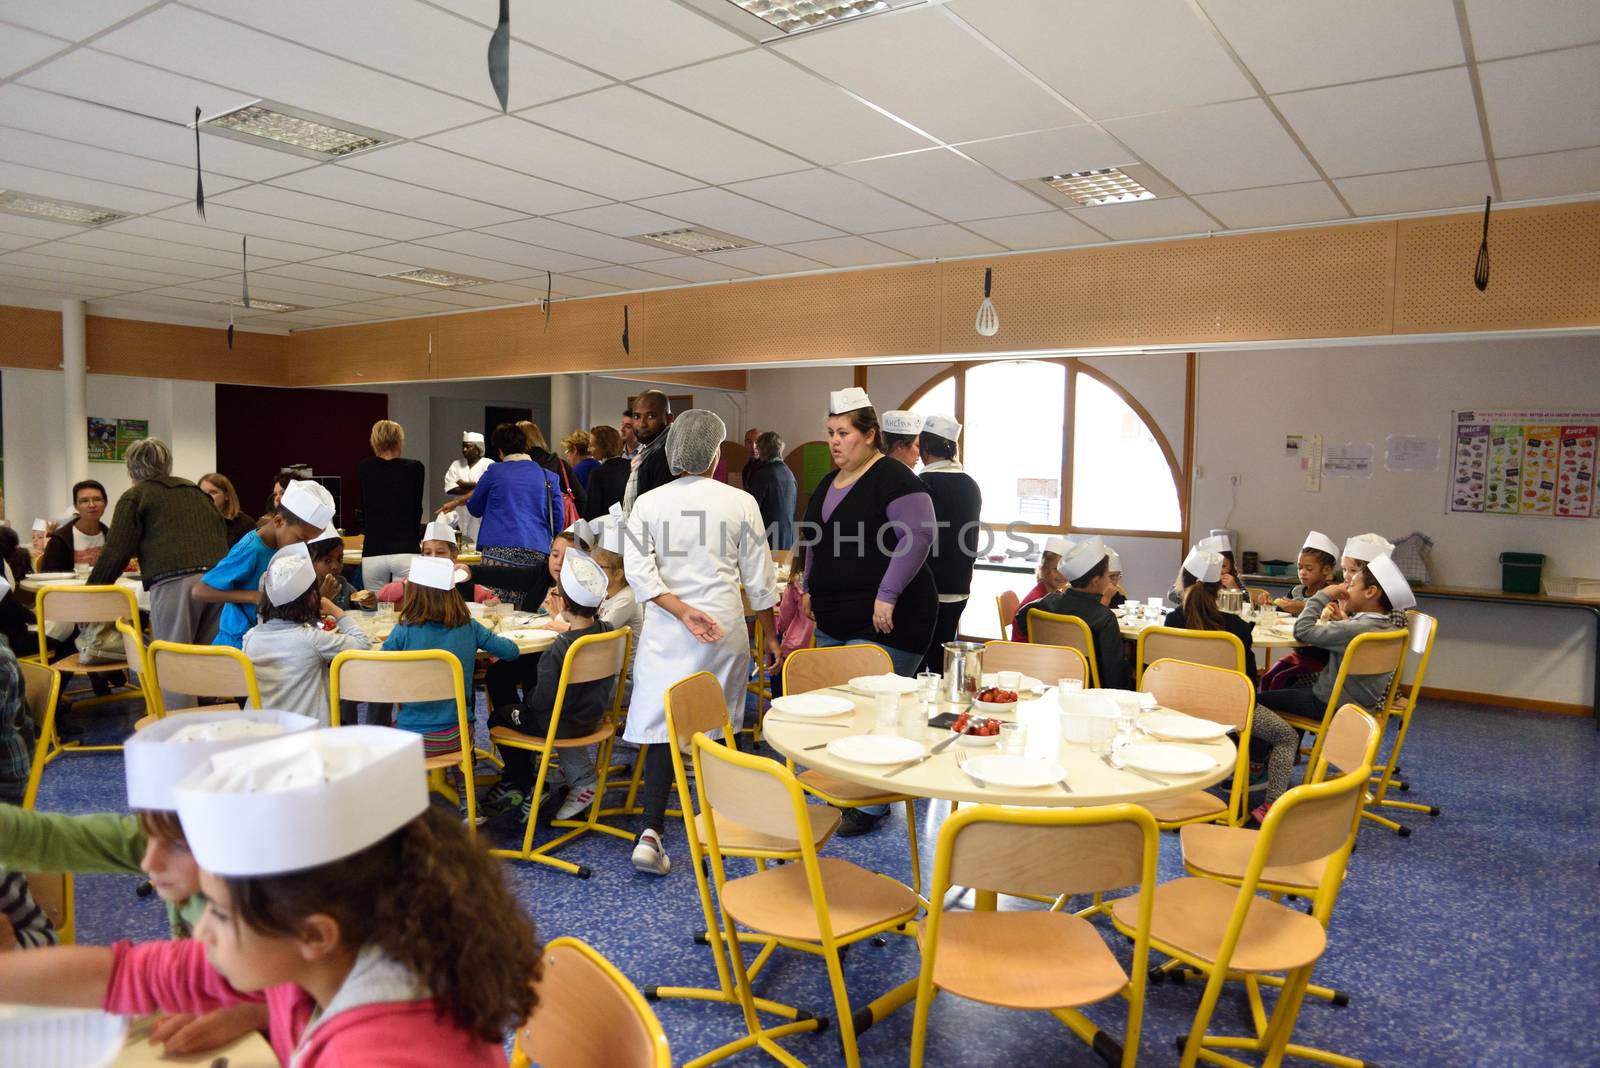 FRANCE, Valence : Pupils sit at canteen tables waiting for their exceptional menu at Celestin Freinet school in Valence (Dr�me), on September 25, 2015 on the occasion of French gastronomy days from September 25 to September 27, 2015. 